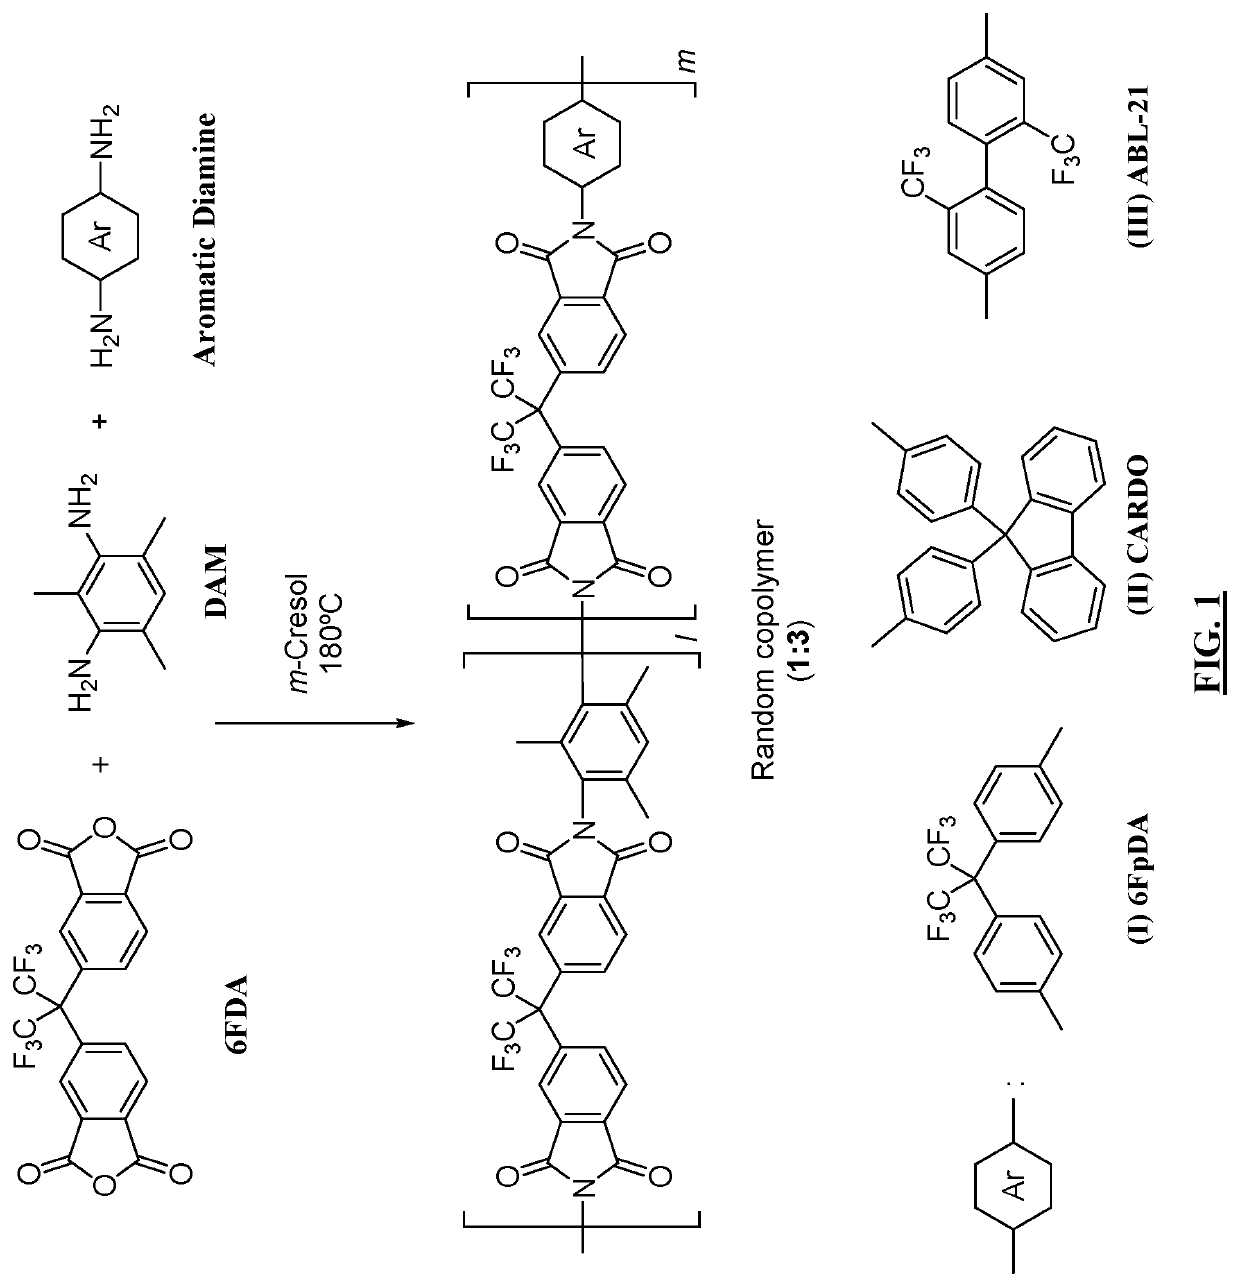 Aromatic co-polyimide gas separation membranes derived from 6FDA-DAM-type homo-polyimides